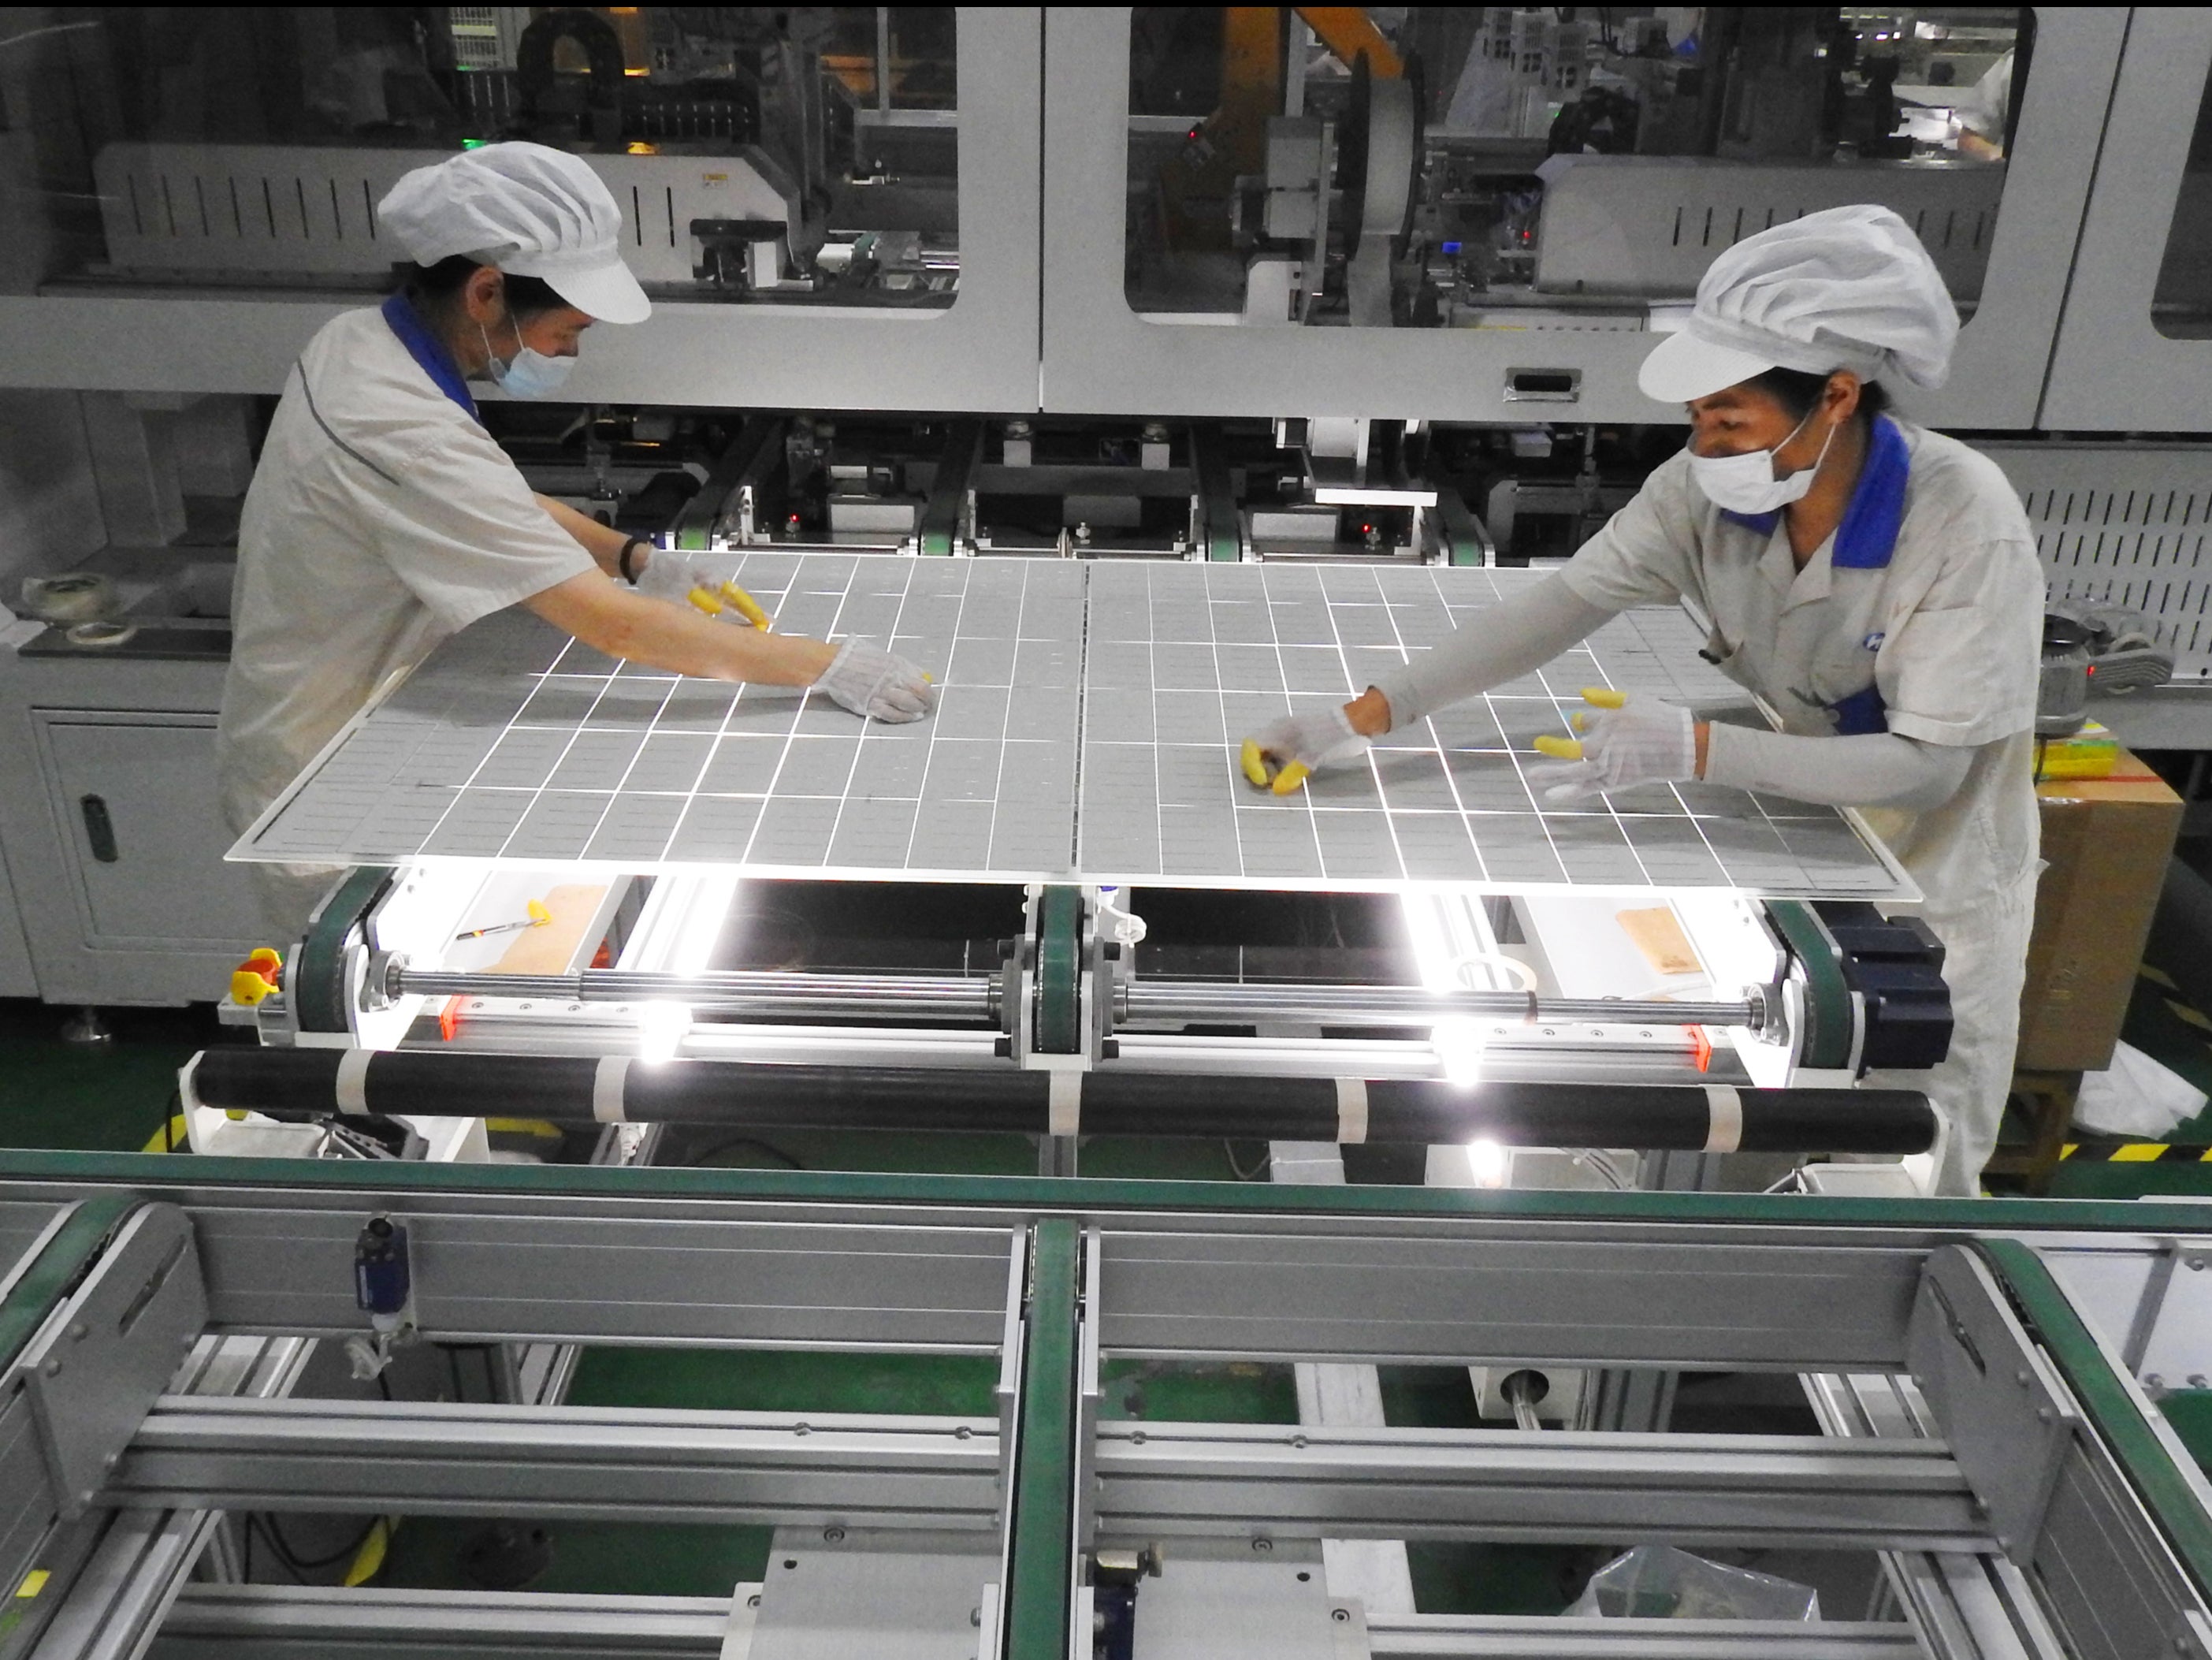 The rise of China in the solar energy market has driven down costs at a phenomenal pace